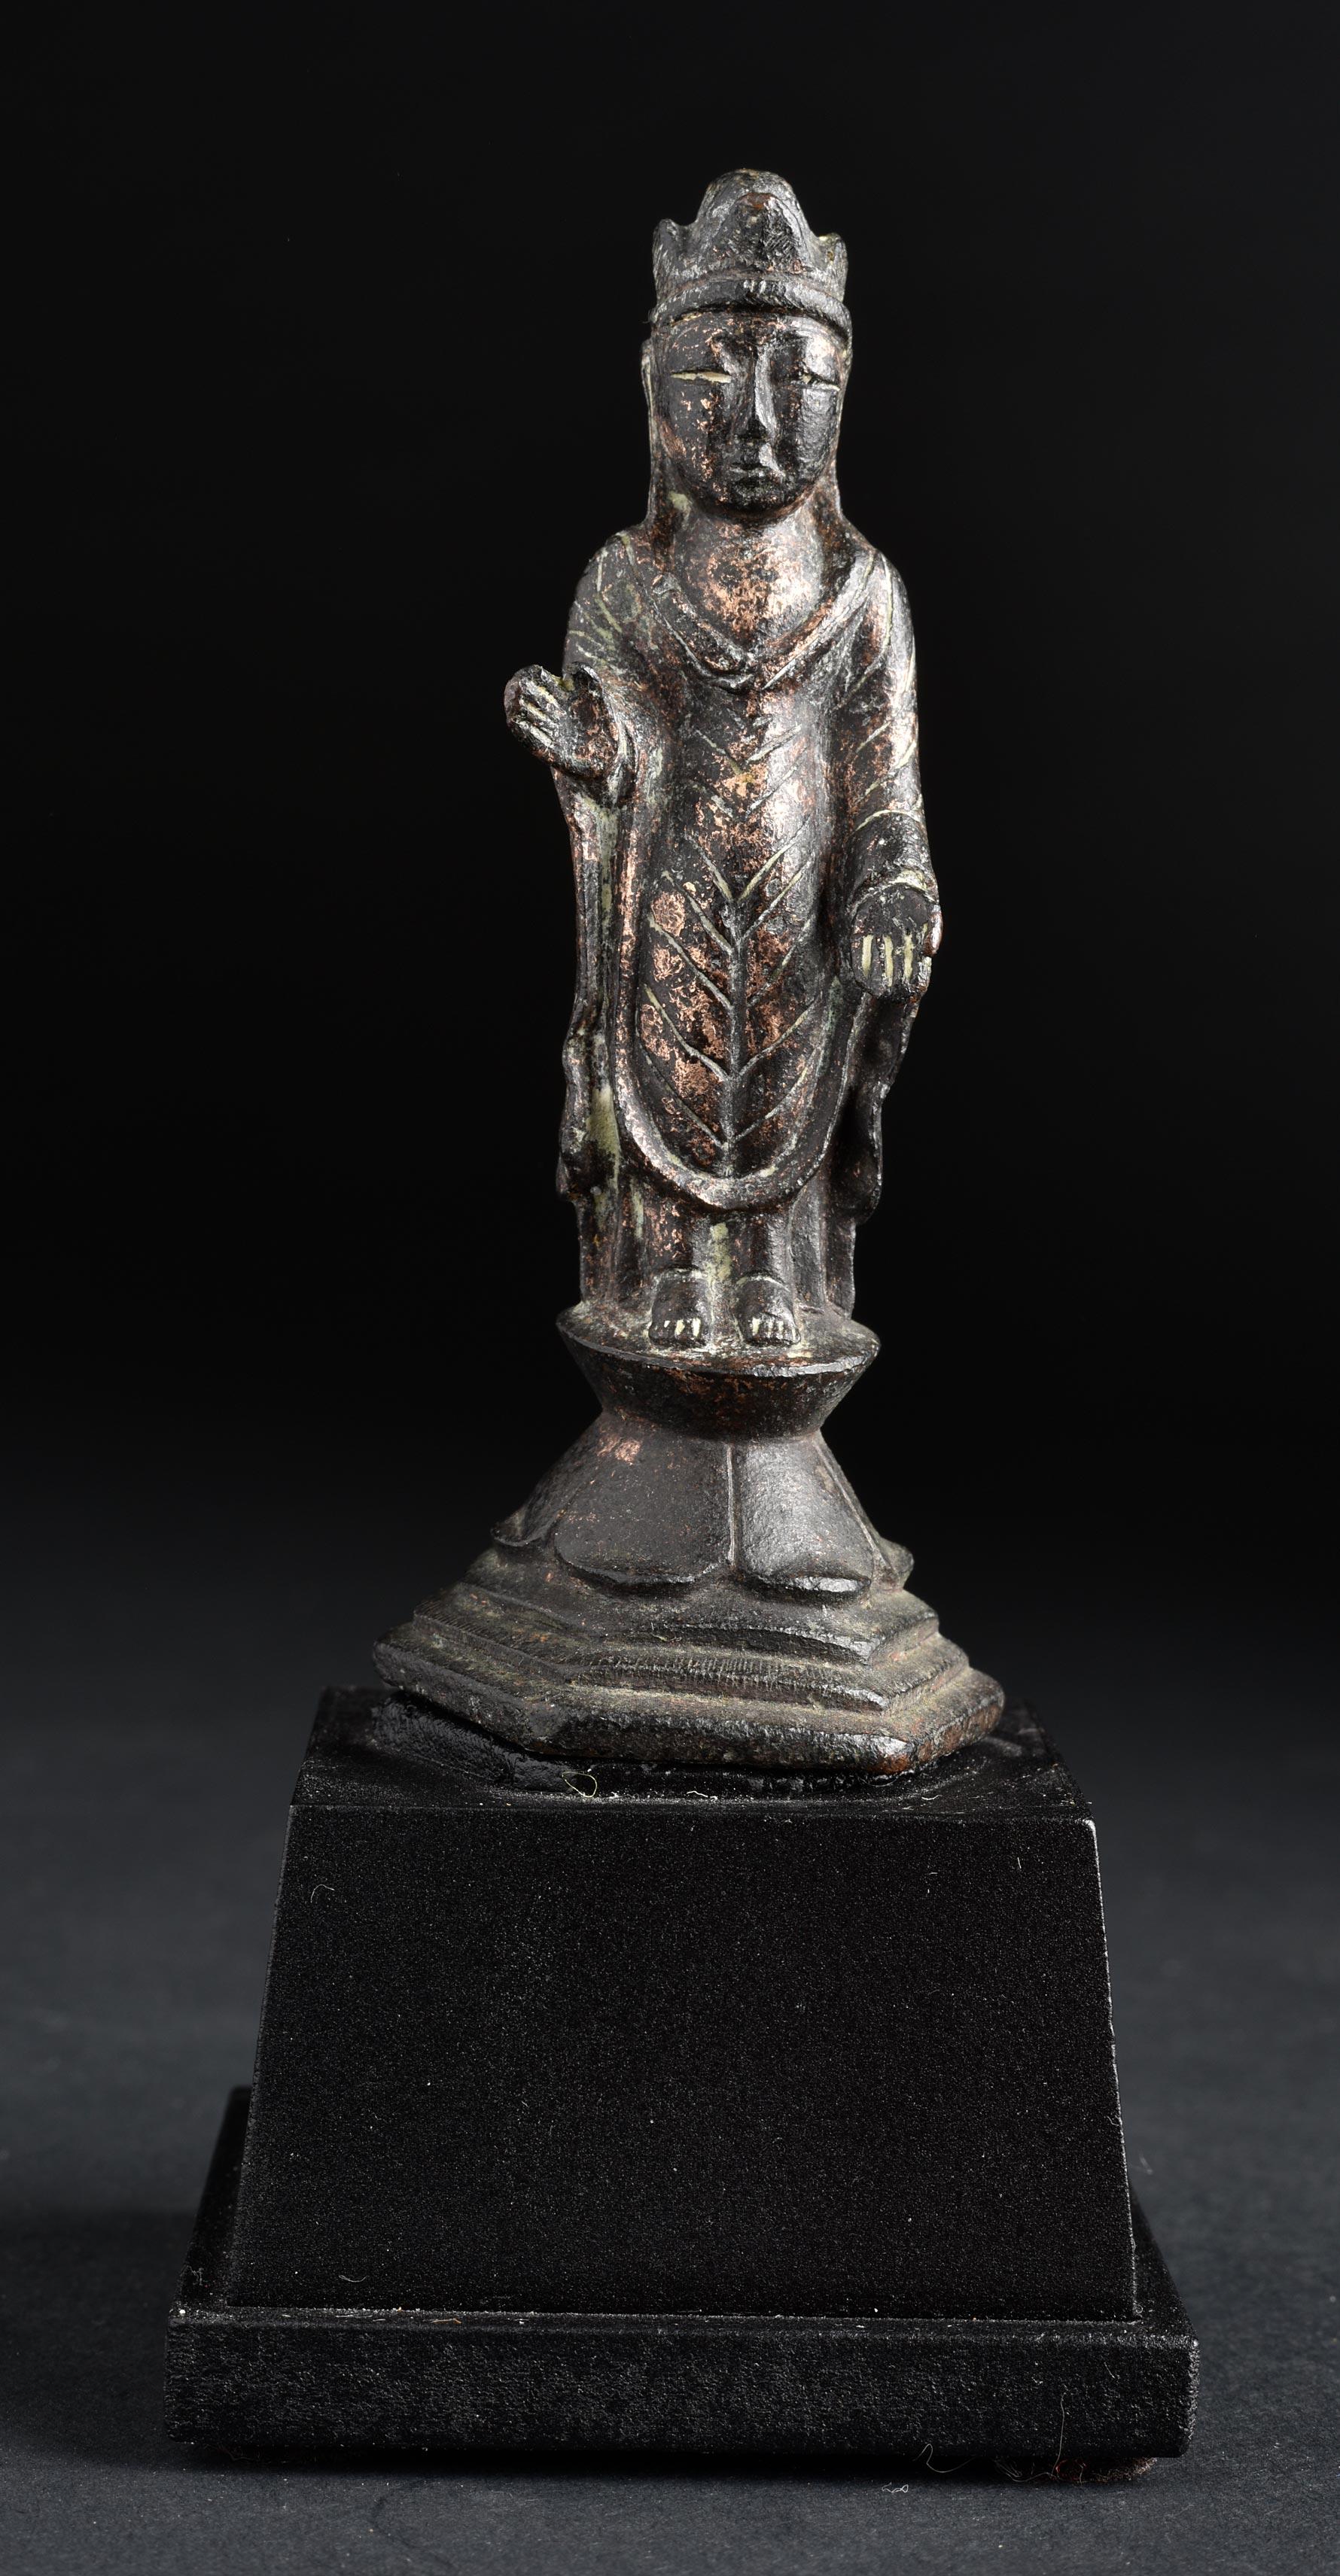 Well cast very fine and rare  8-10thC Korean Buddha- nice face, remains of original gilding throughout. No damage or loss except for usual surface wear. Originally had a separately cast Mandorla. Stands 3.25 inches tall. Leans slightly to the left.